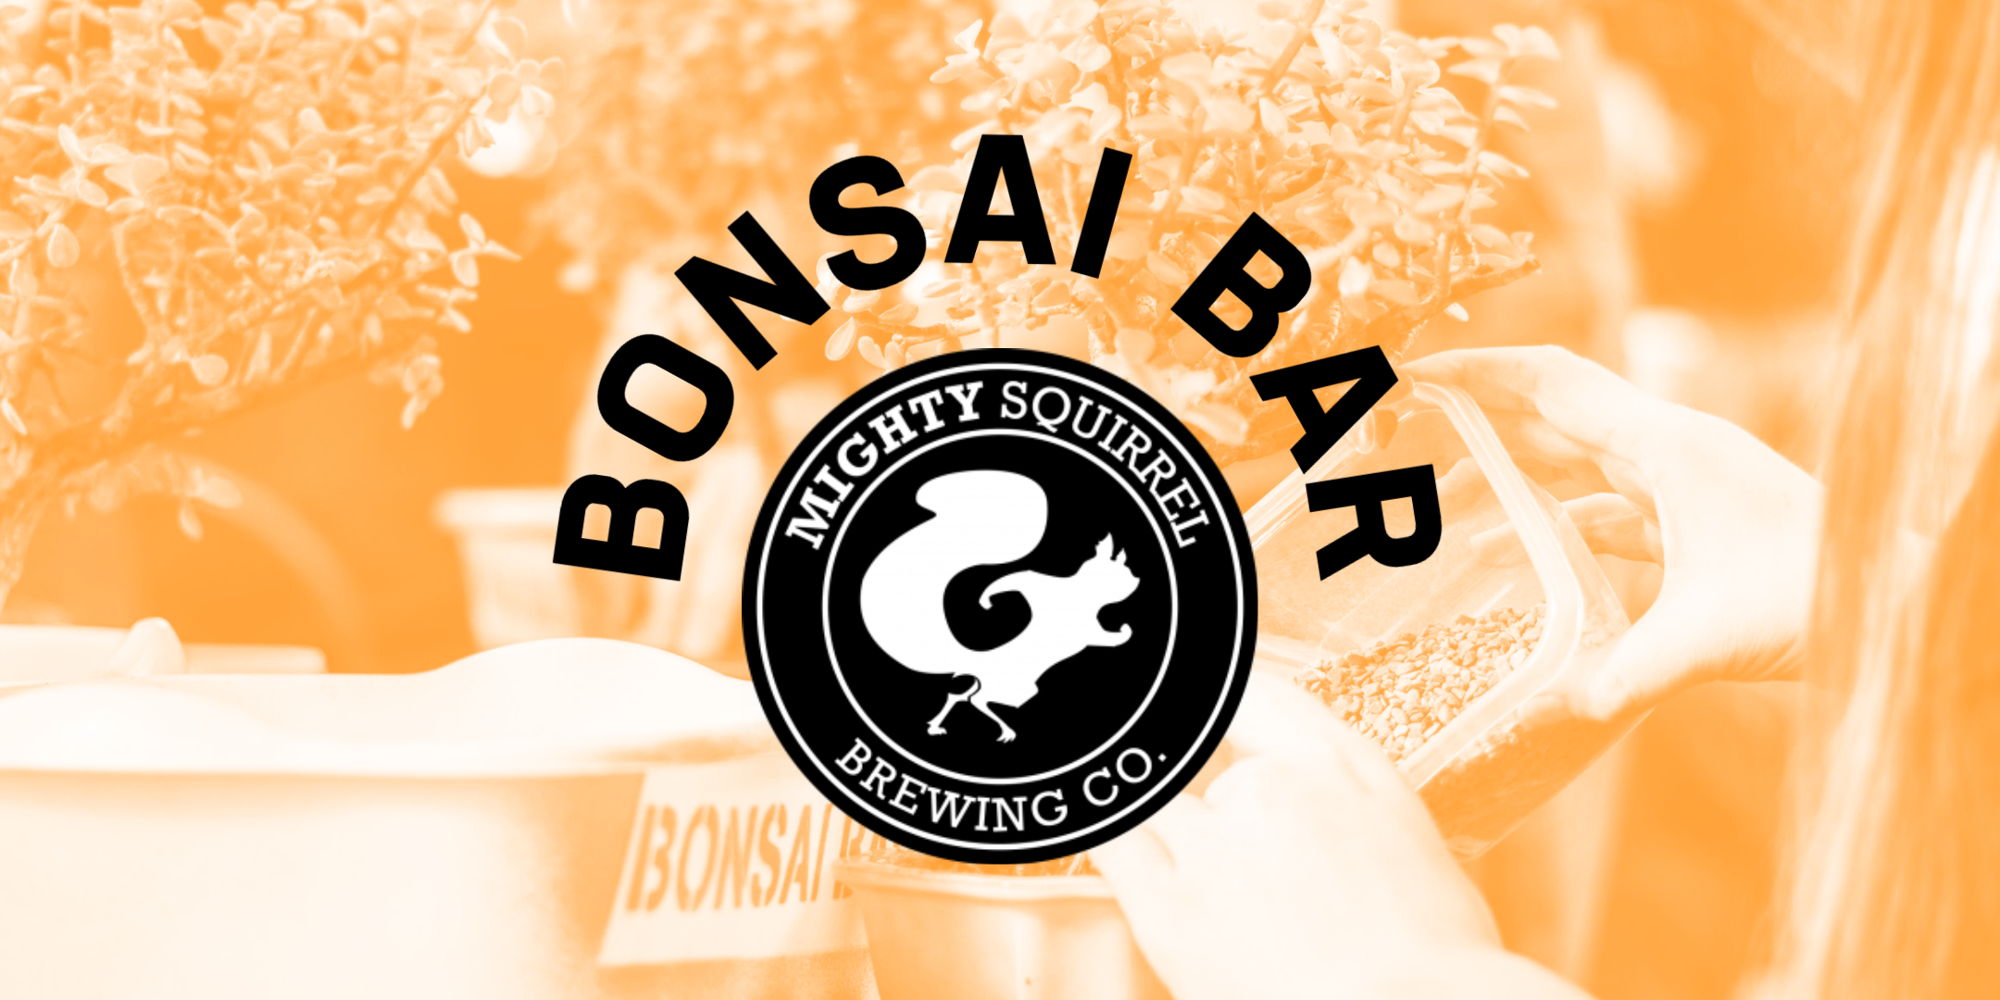 Bonsai Bar @ Mighty Squirrel promotional image